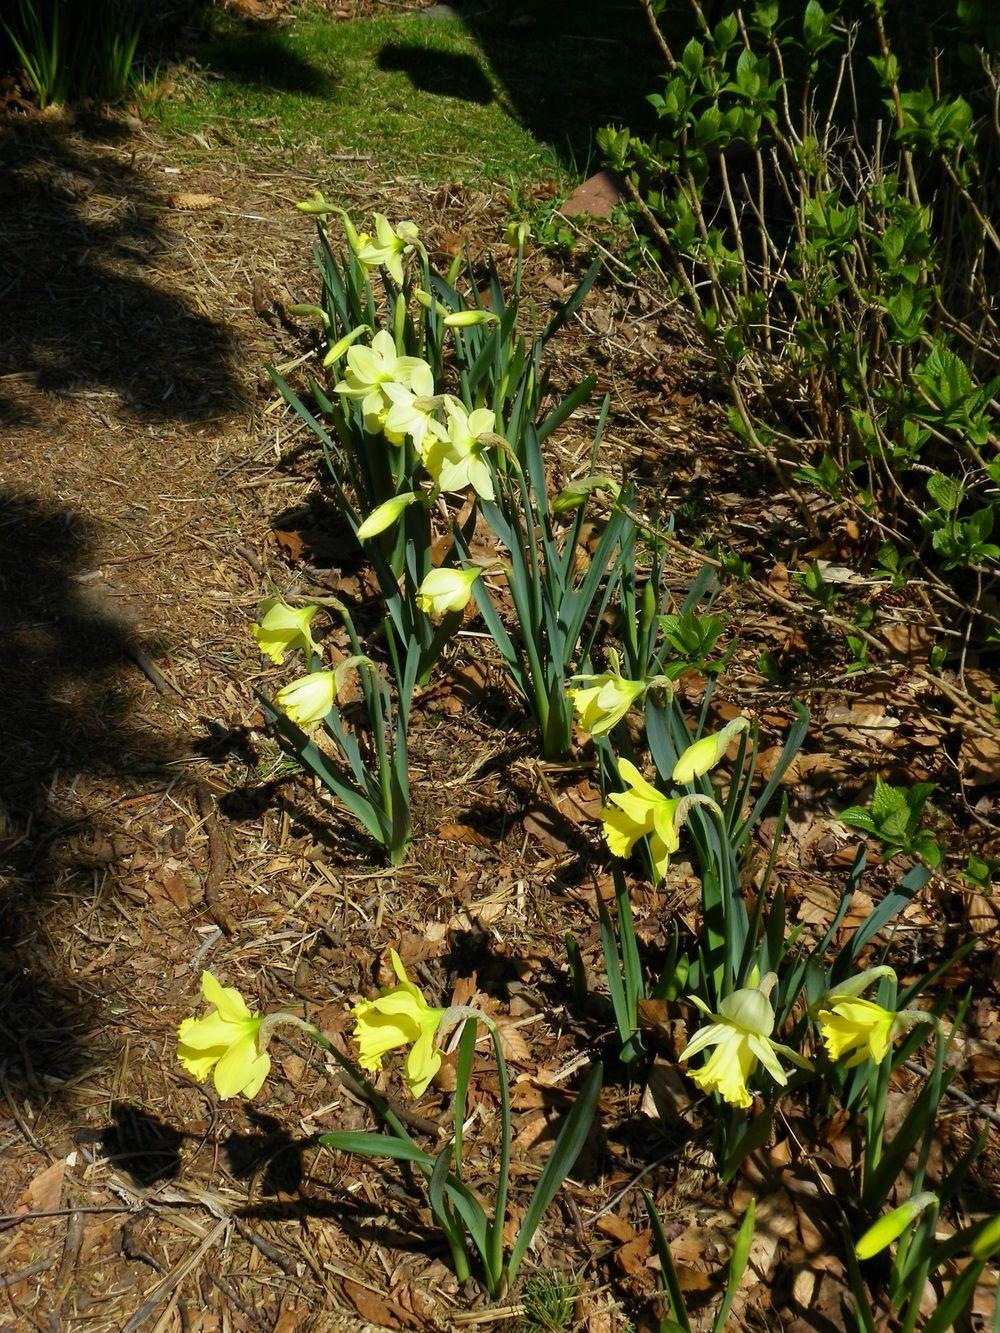 Photo of Daffodils (Narcissus) uploaded by Newyorkrita